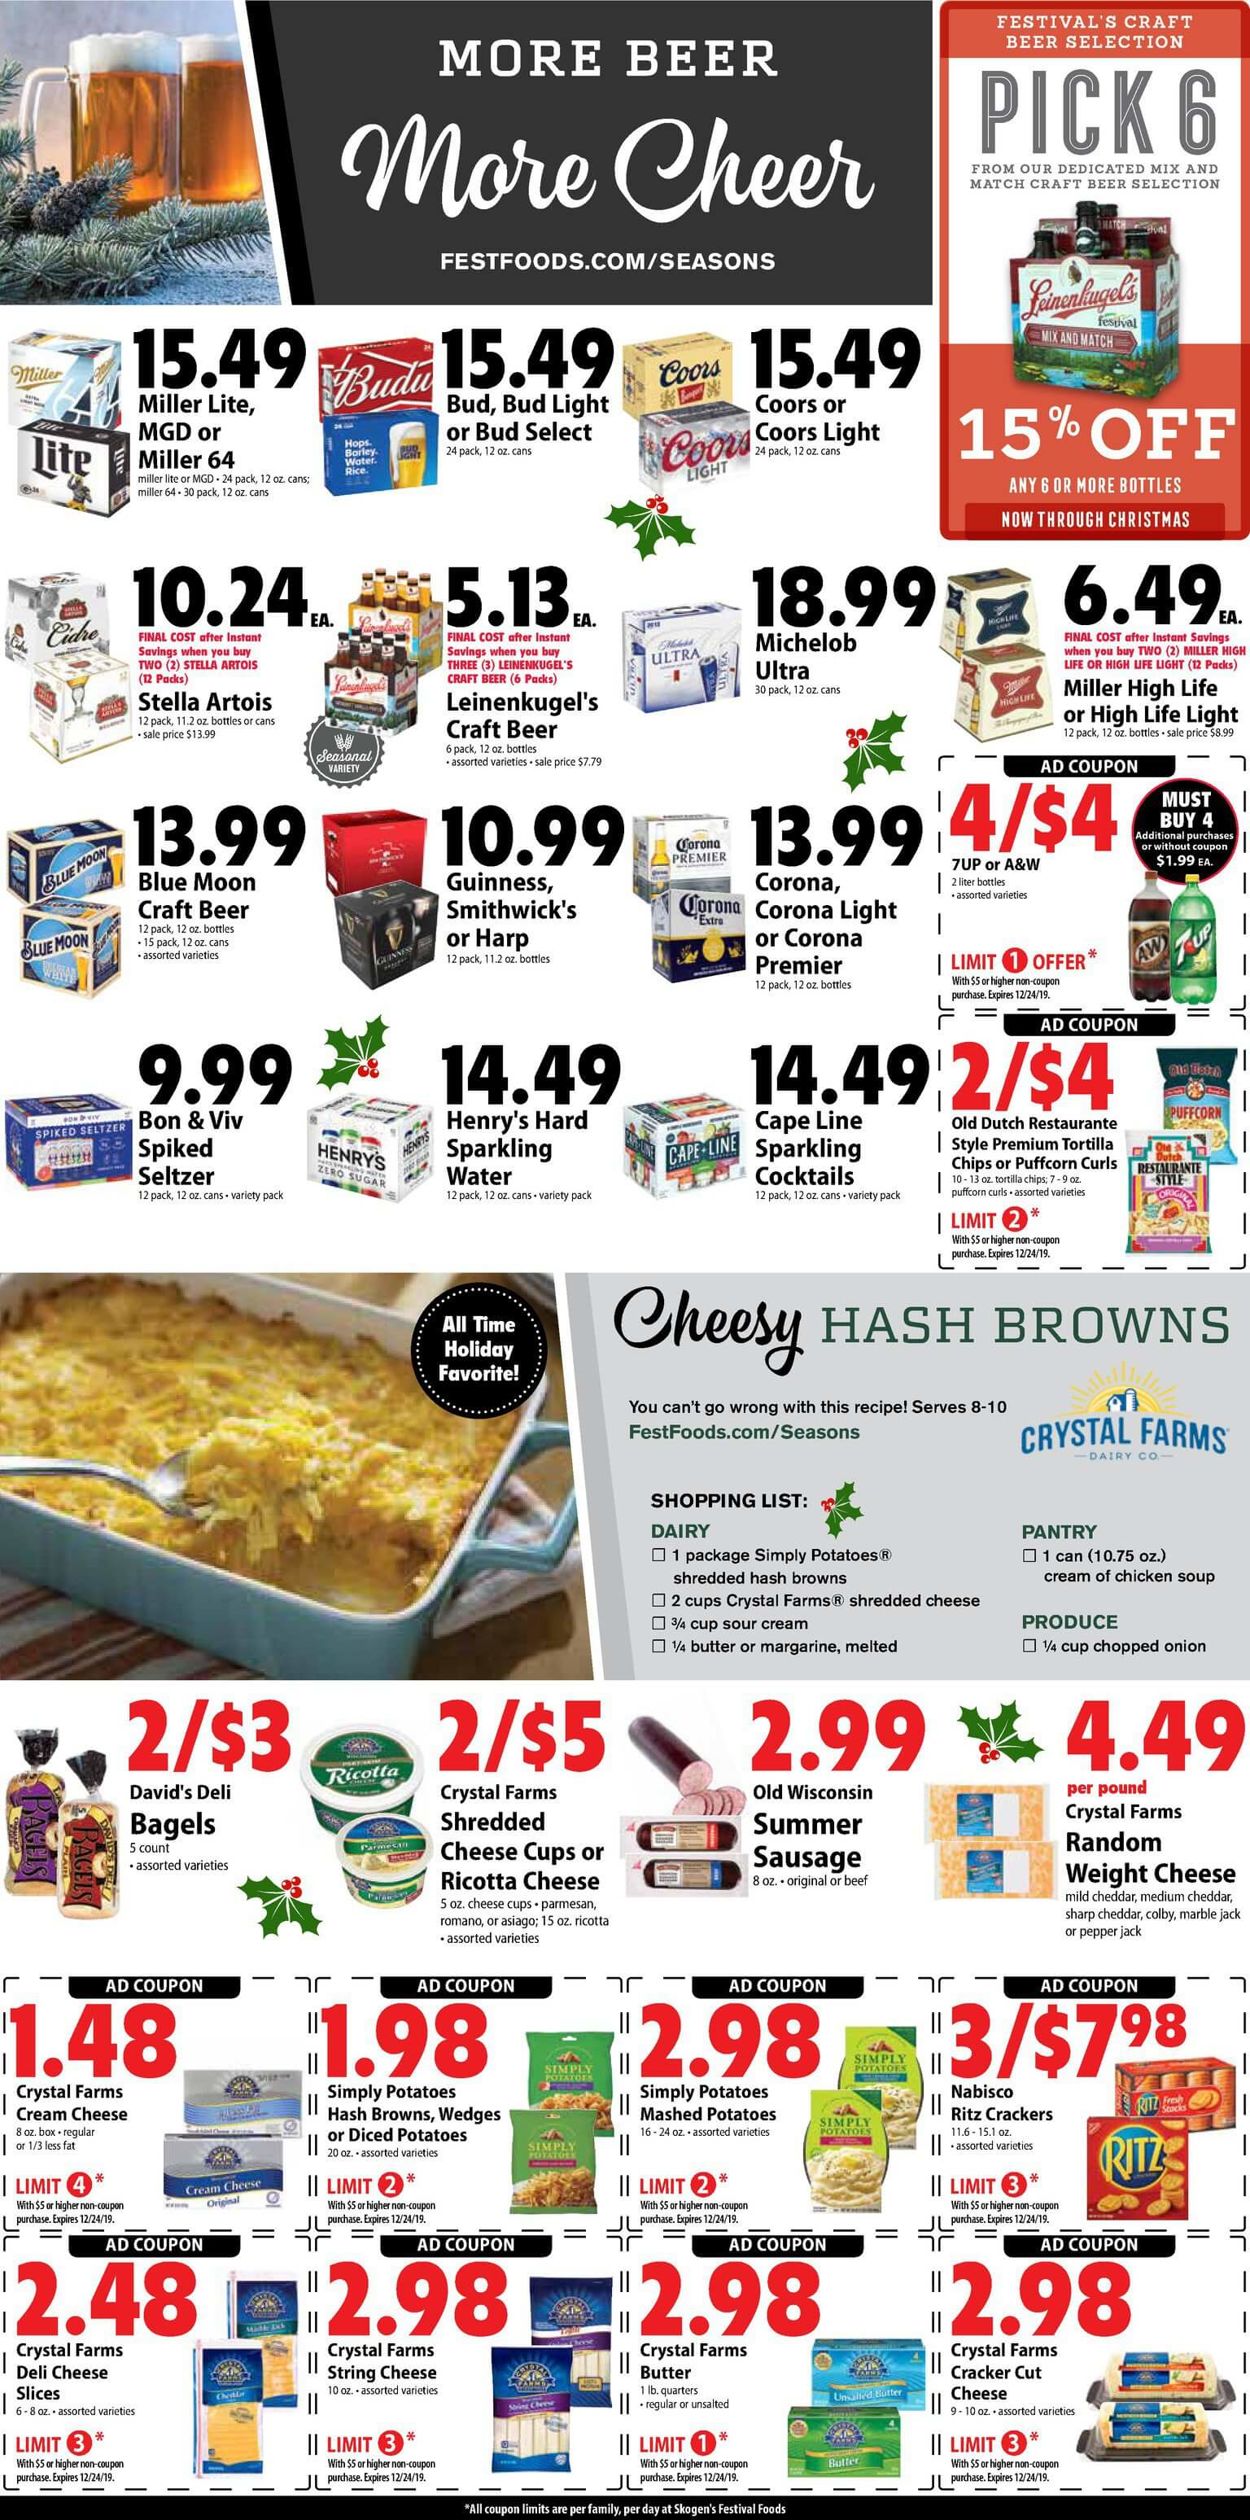 Festival Foods Current weekly ad 12/18 - 12/24/2019 [8] - frequent-ads.com